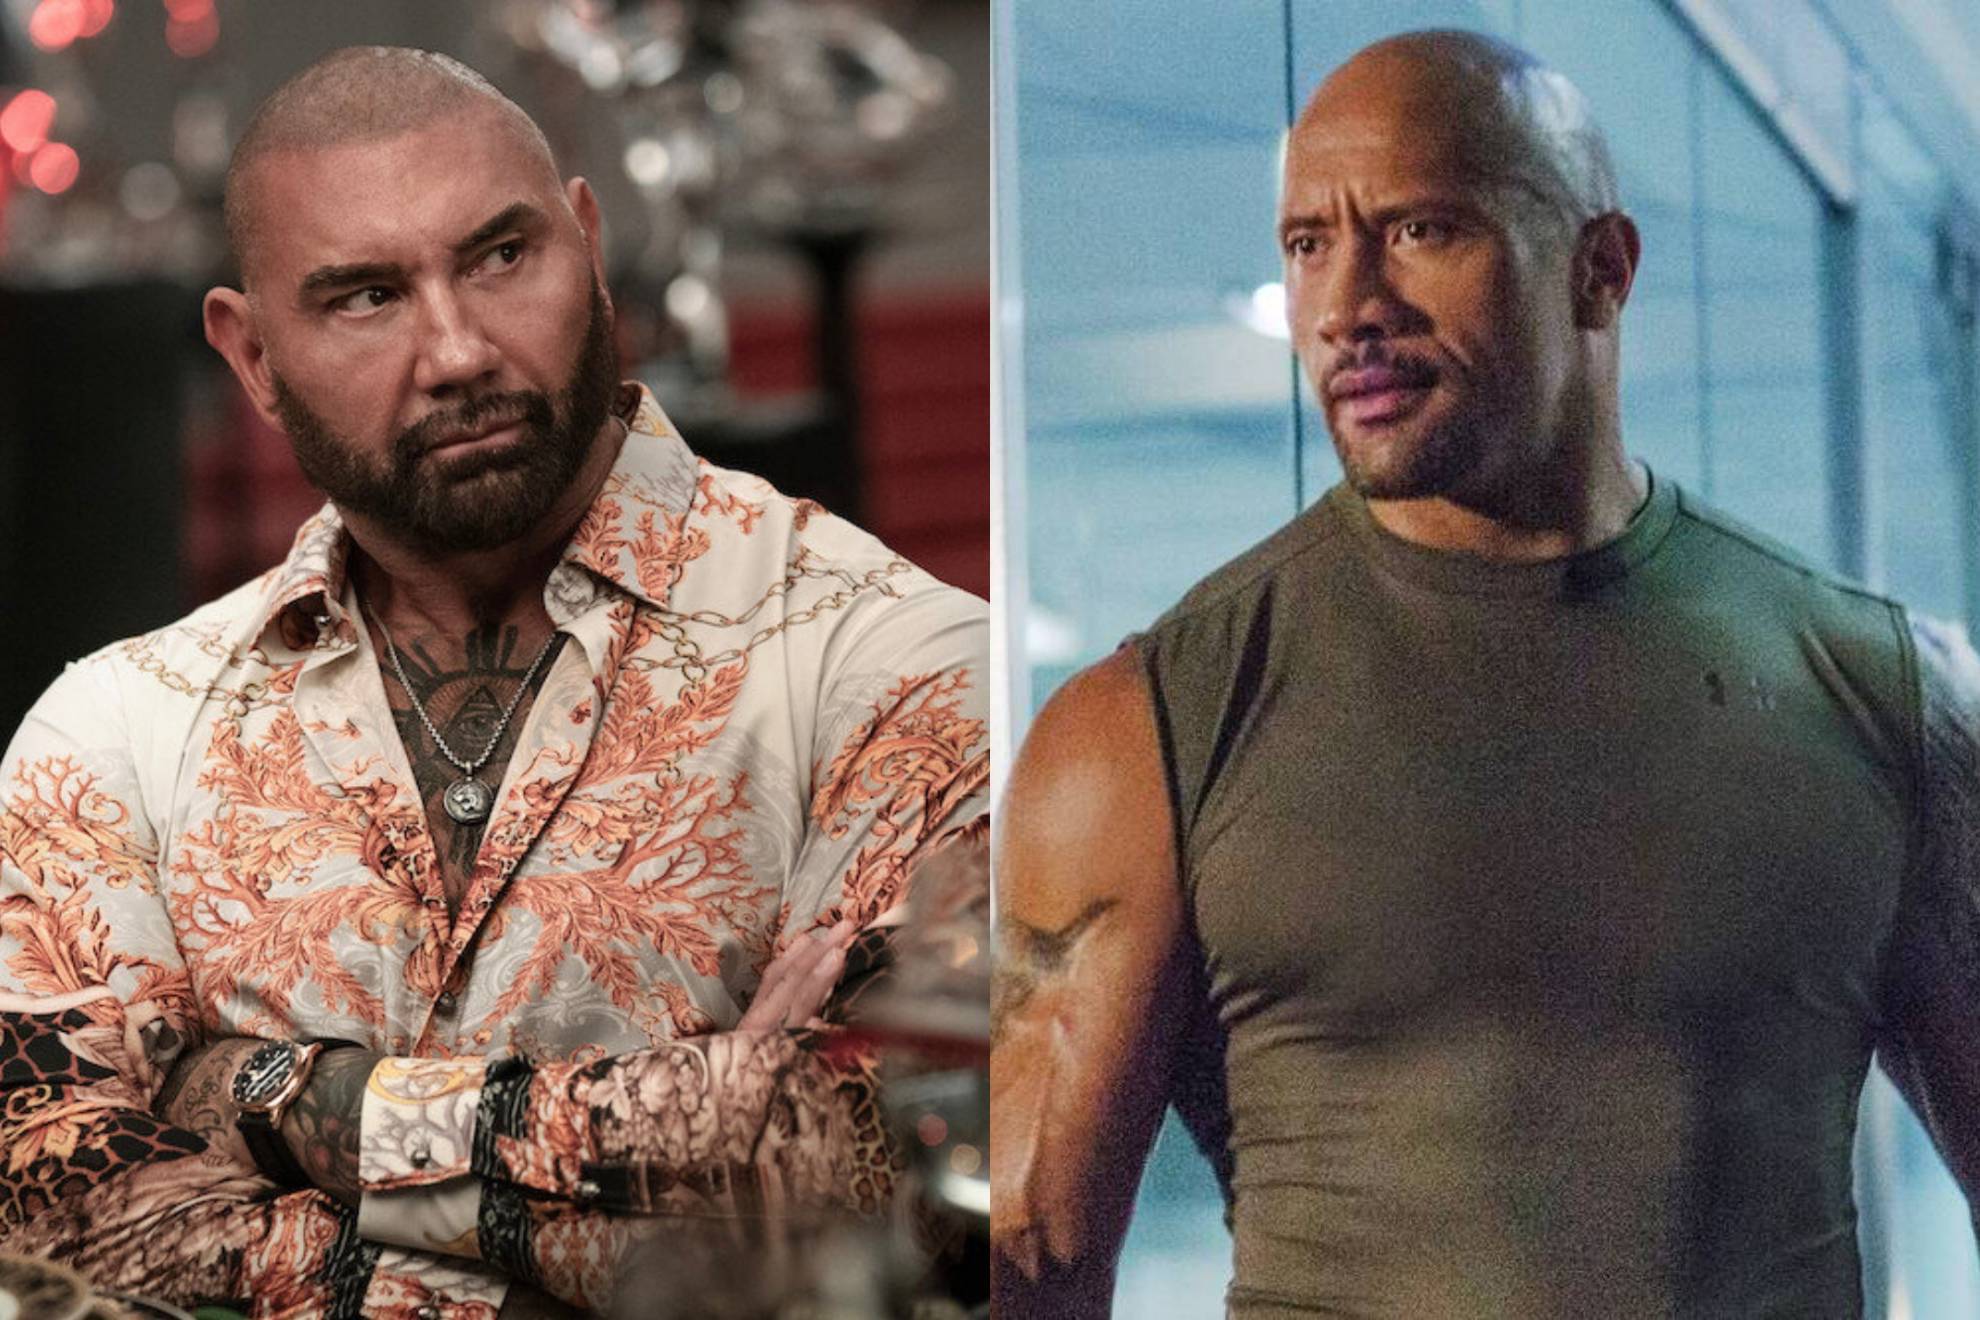 Dave Bautista: “I never wanted to be the next Rock. I just want to